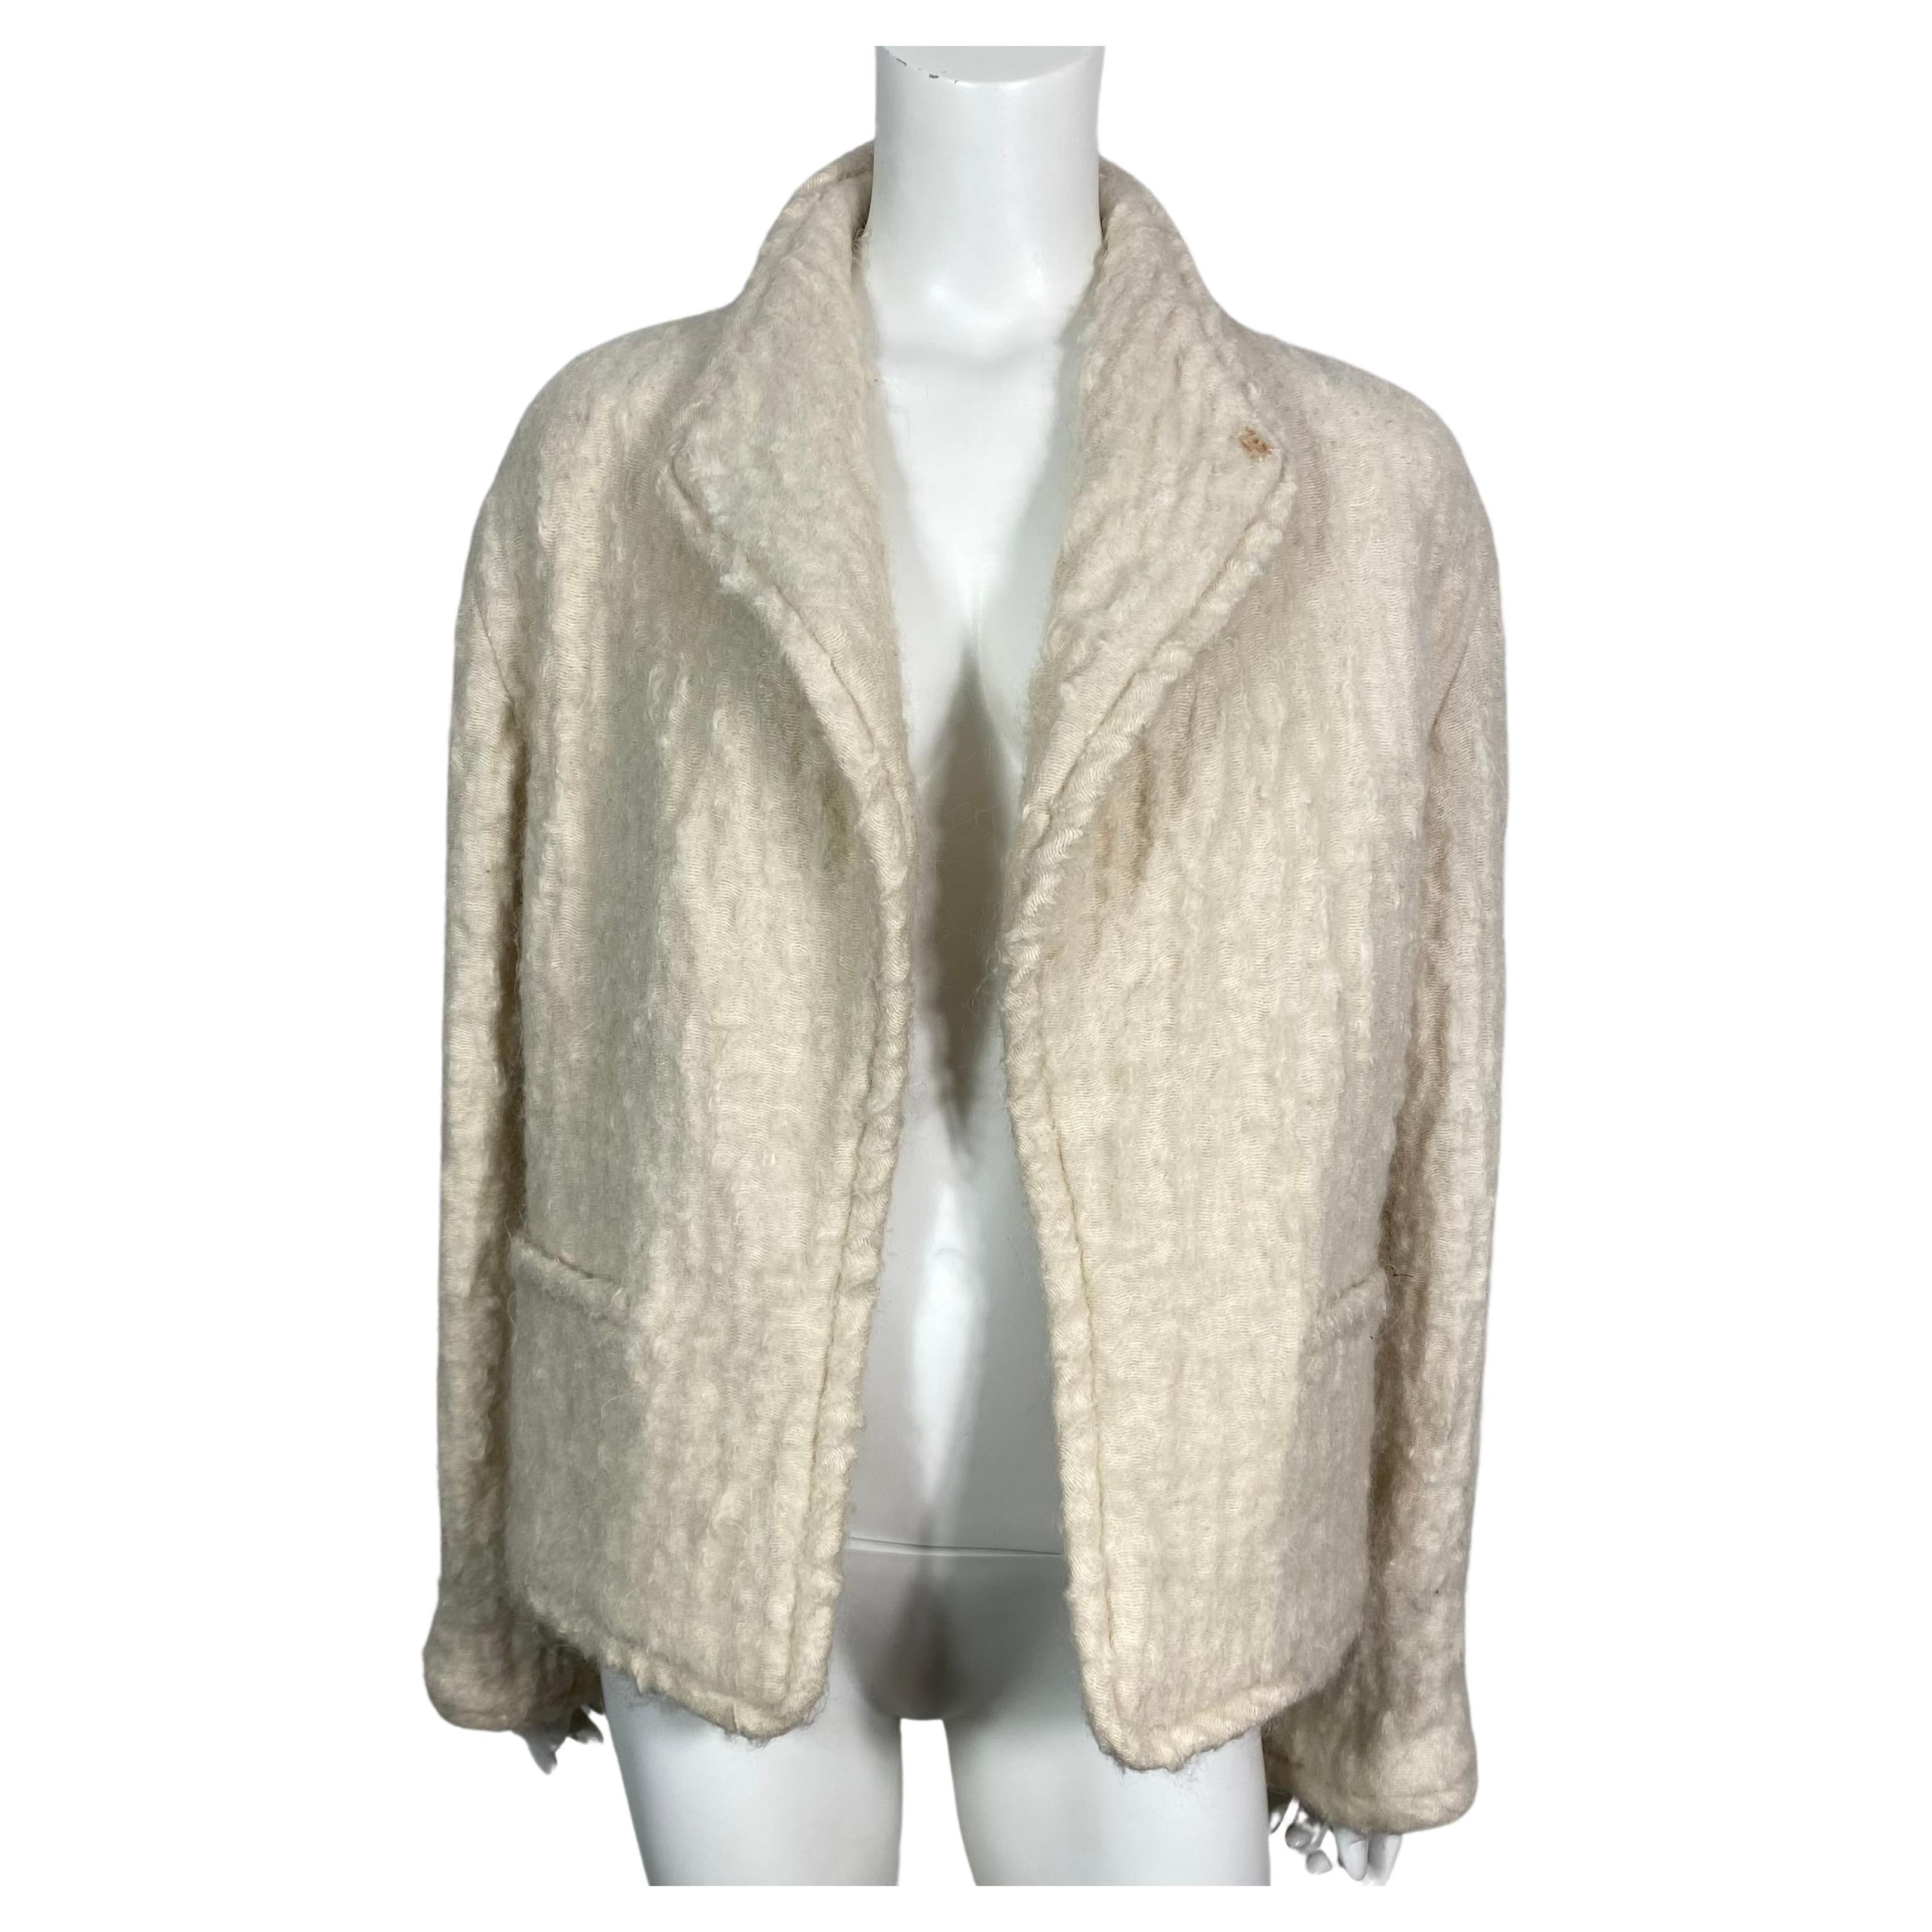 Chanel Runway Fall 1998 Creme Mohair & Wool Blend Jacket - Size 38 For Sale